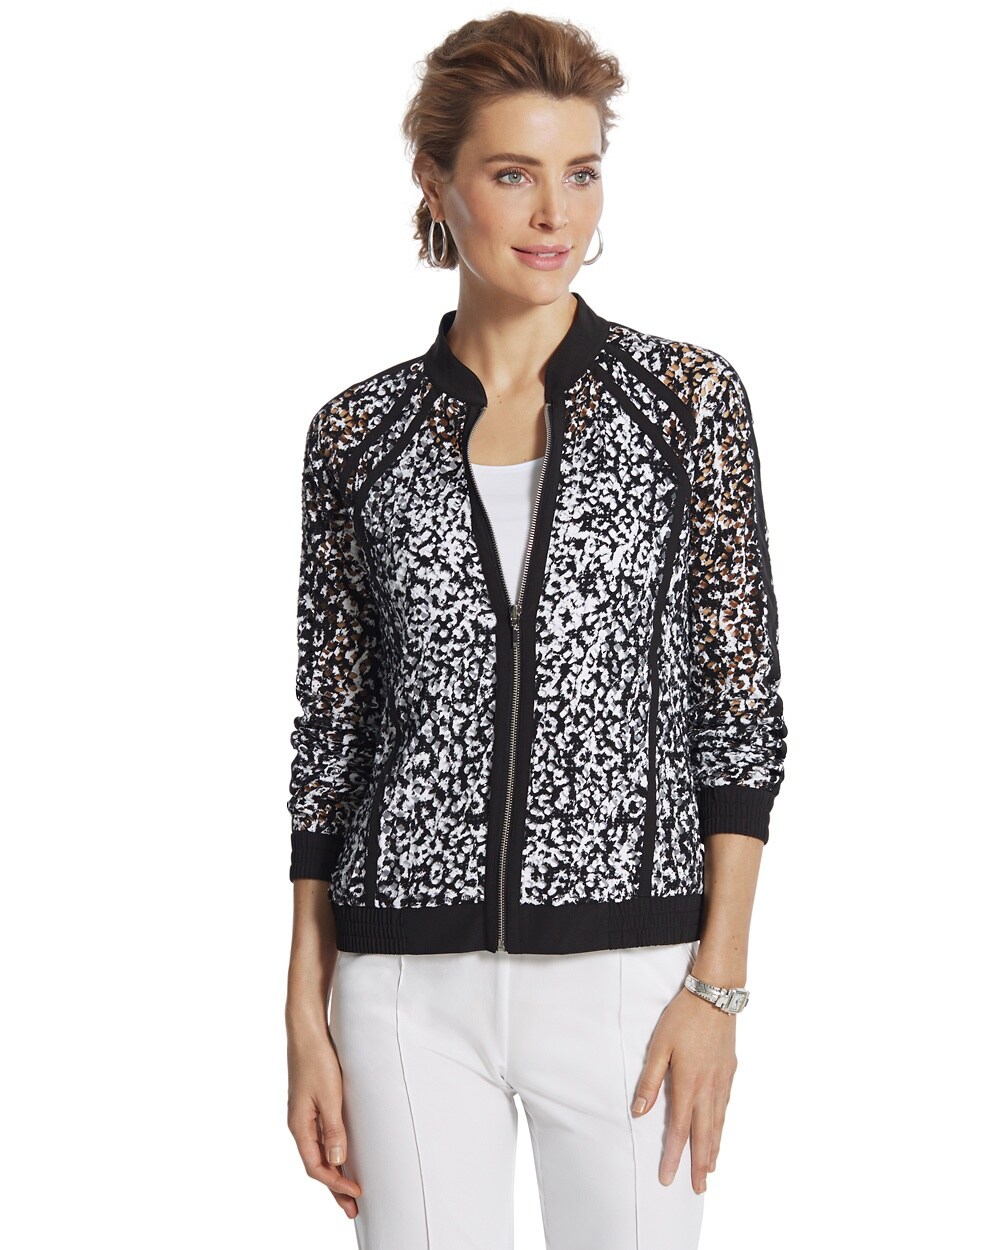 Black-and-White Jacket - Chico's